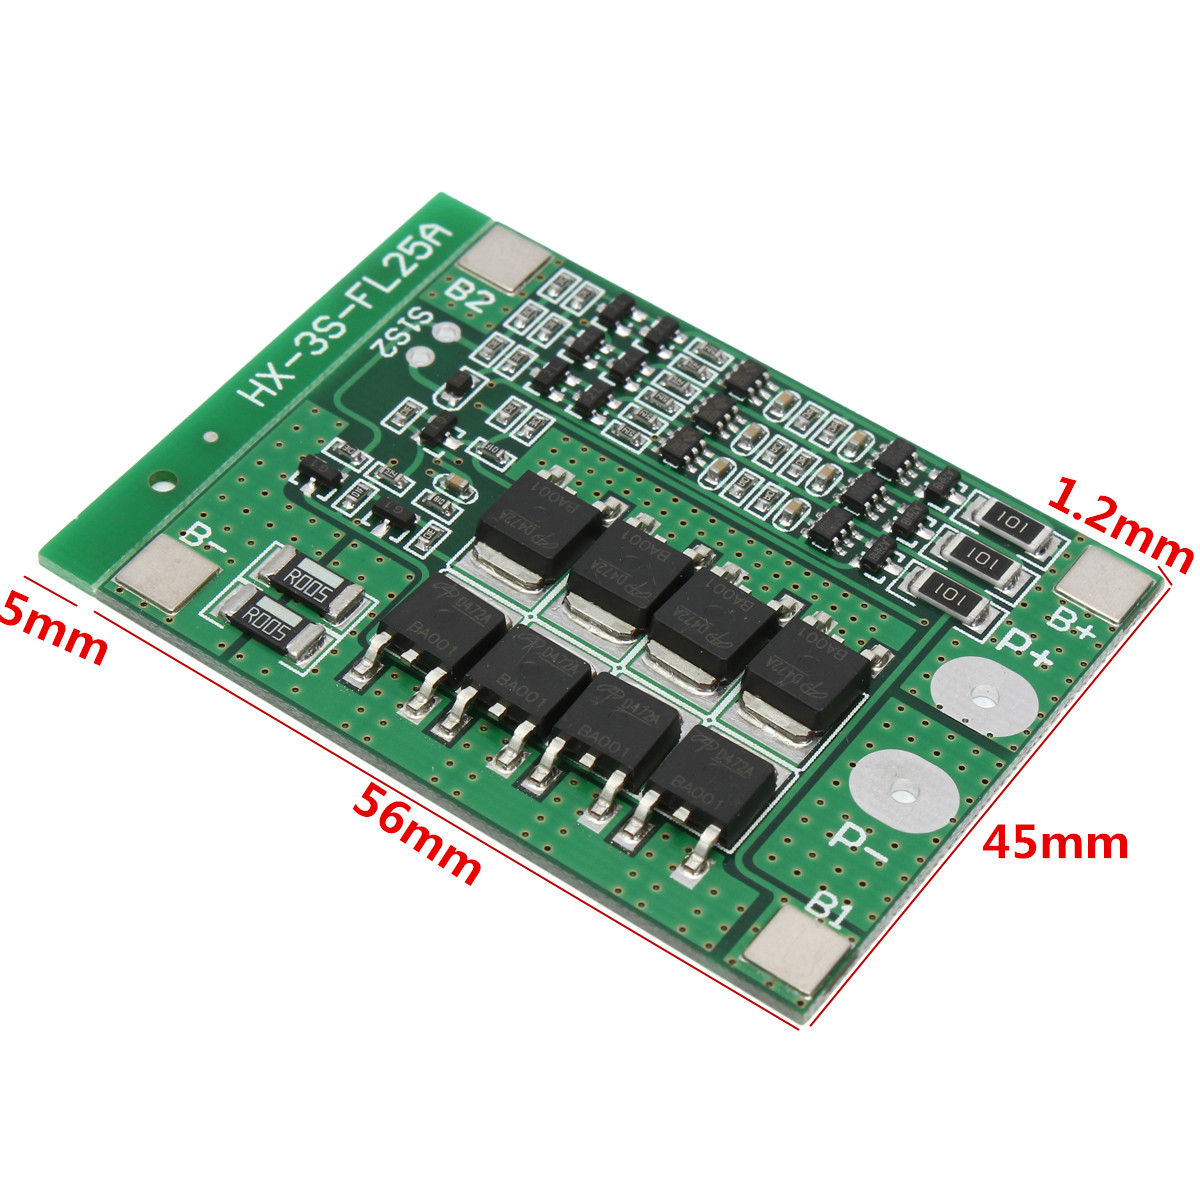 10pcs-3S-111V-25A-18650-Li-ion-Lithium-Battery-BMS-Protection-PCB-Board-With-Balance-Function-1388428